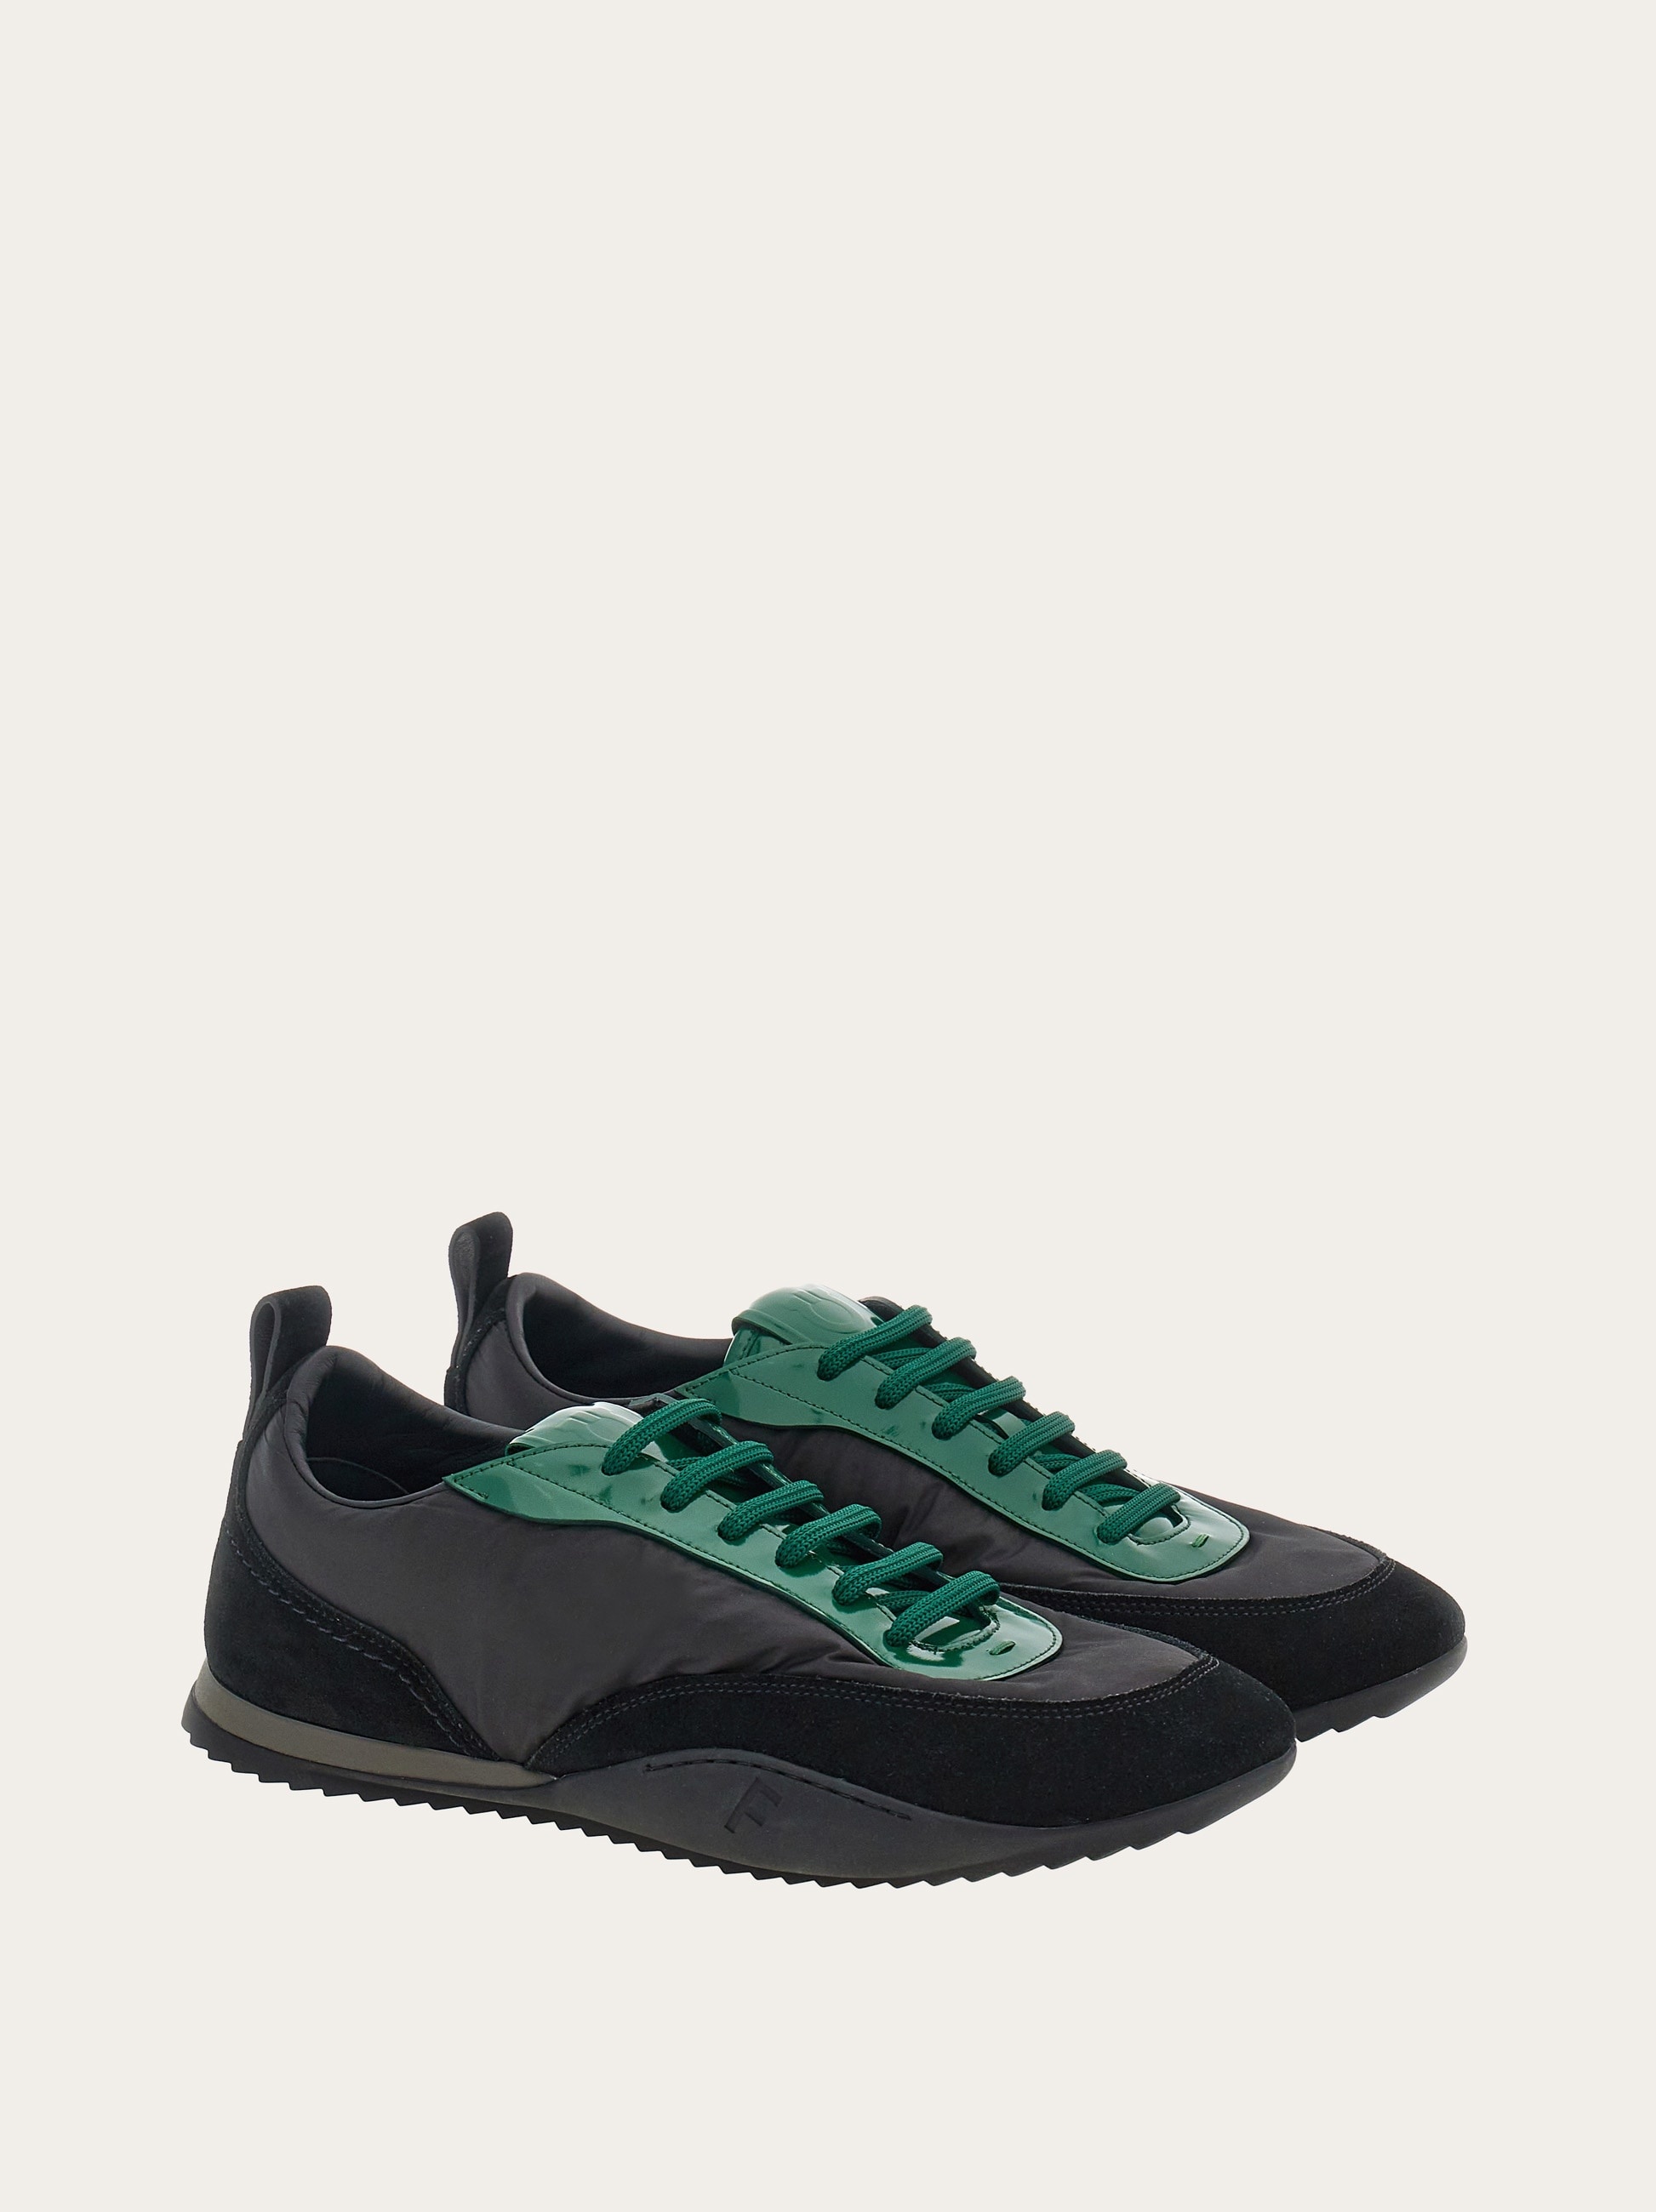 Sneaker with patent leather trim - 4